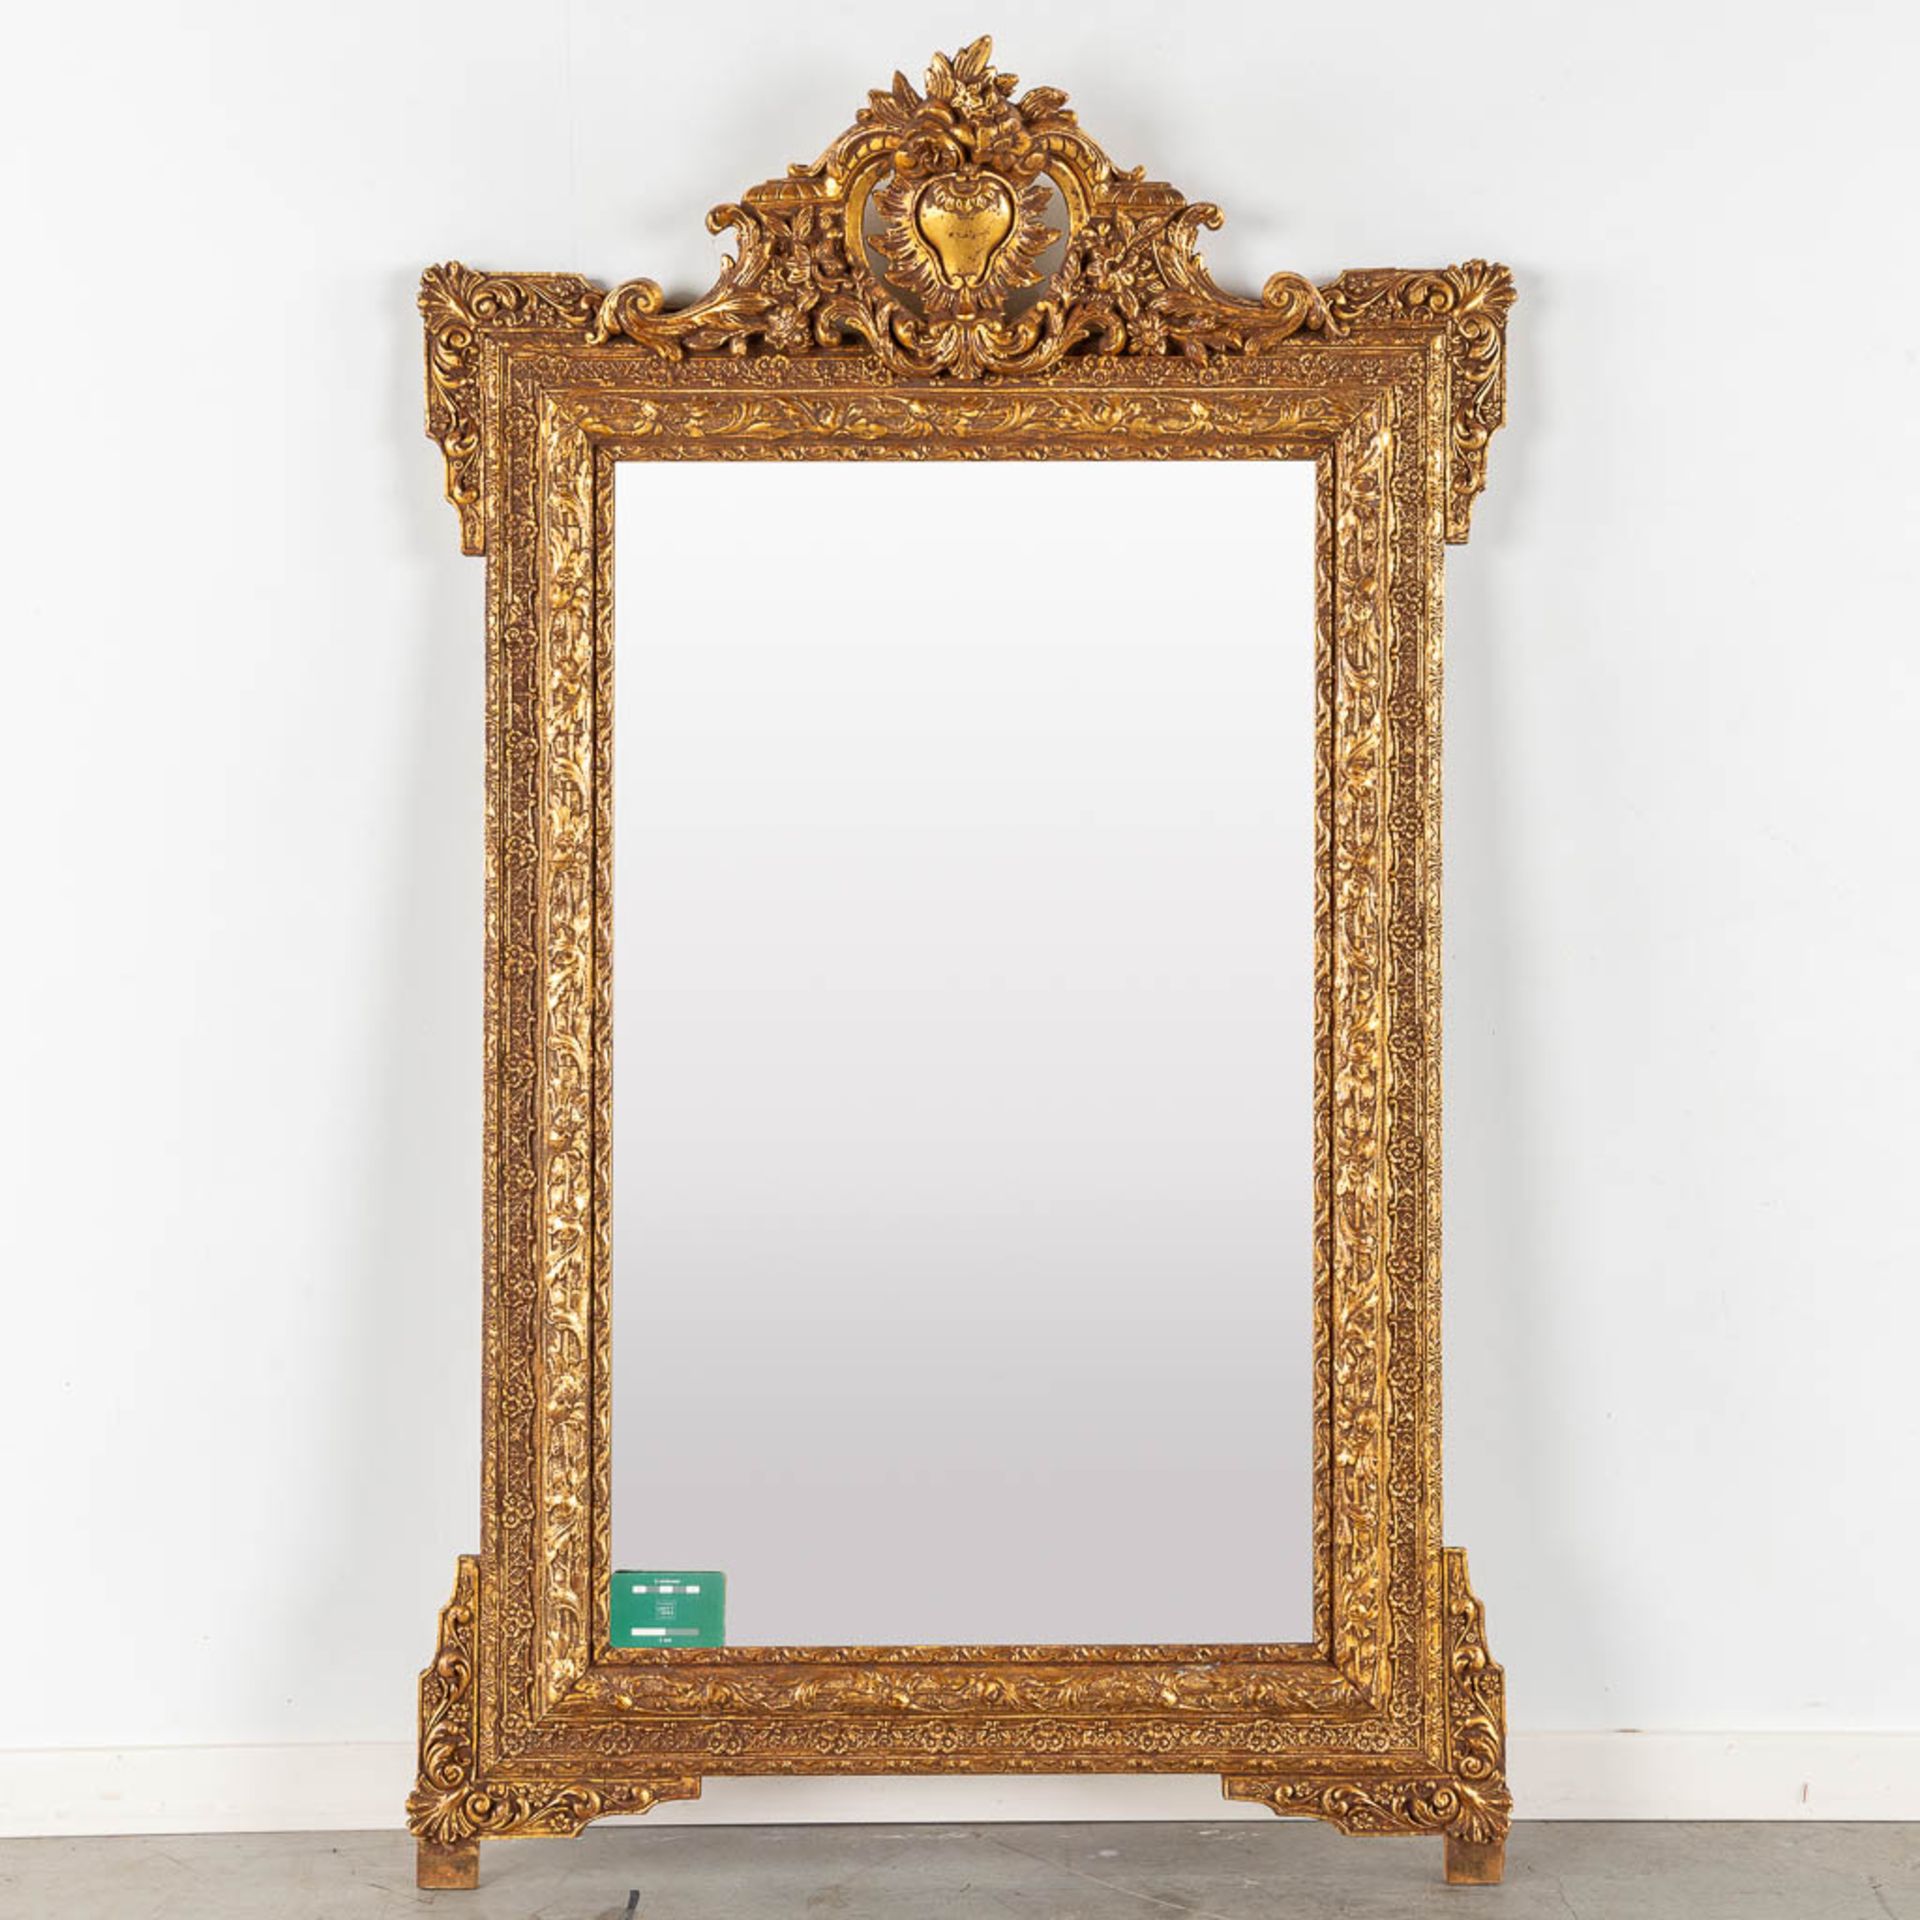 A mirror, sculptured wood and gilt stucco. Circa 1900. (W:135 x H:85 cm) - Image 2 of 8